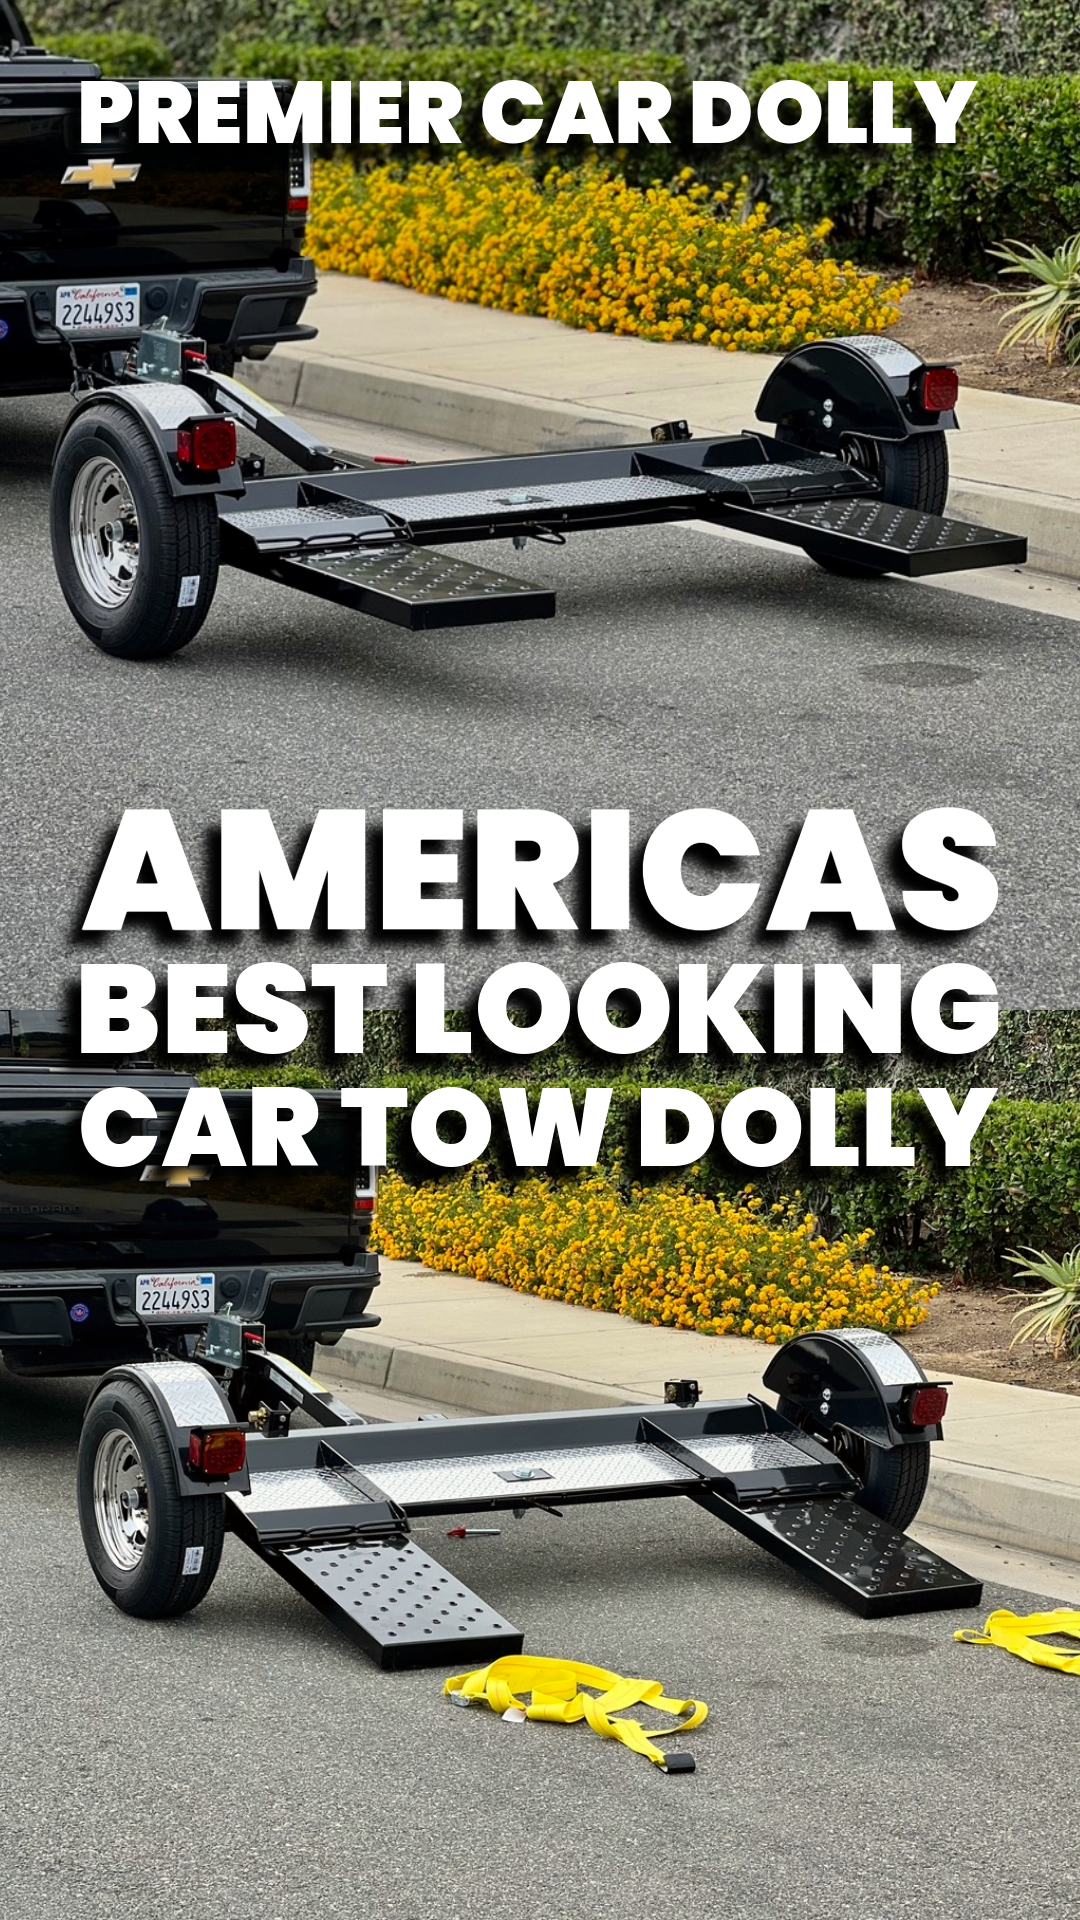 Need to tow a vehicle? Check out this tow dolly trailer